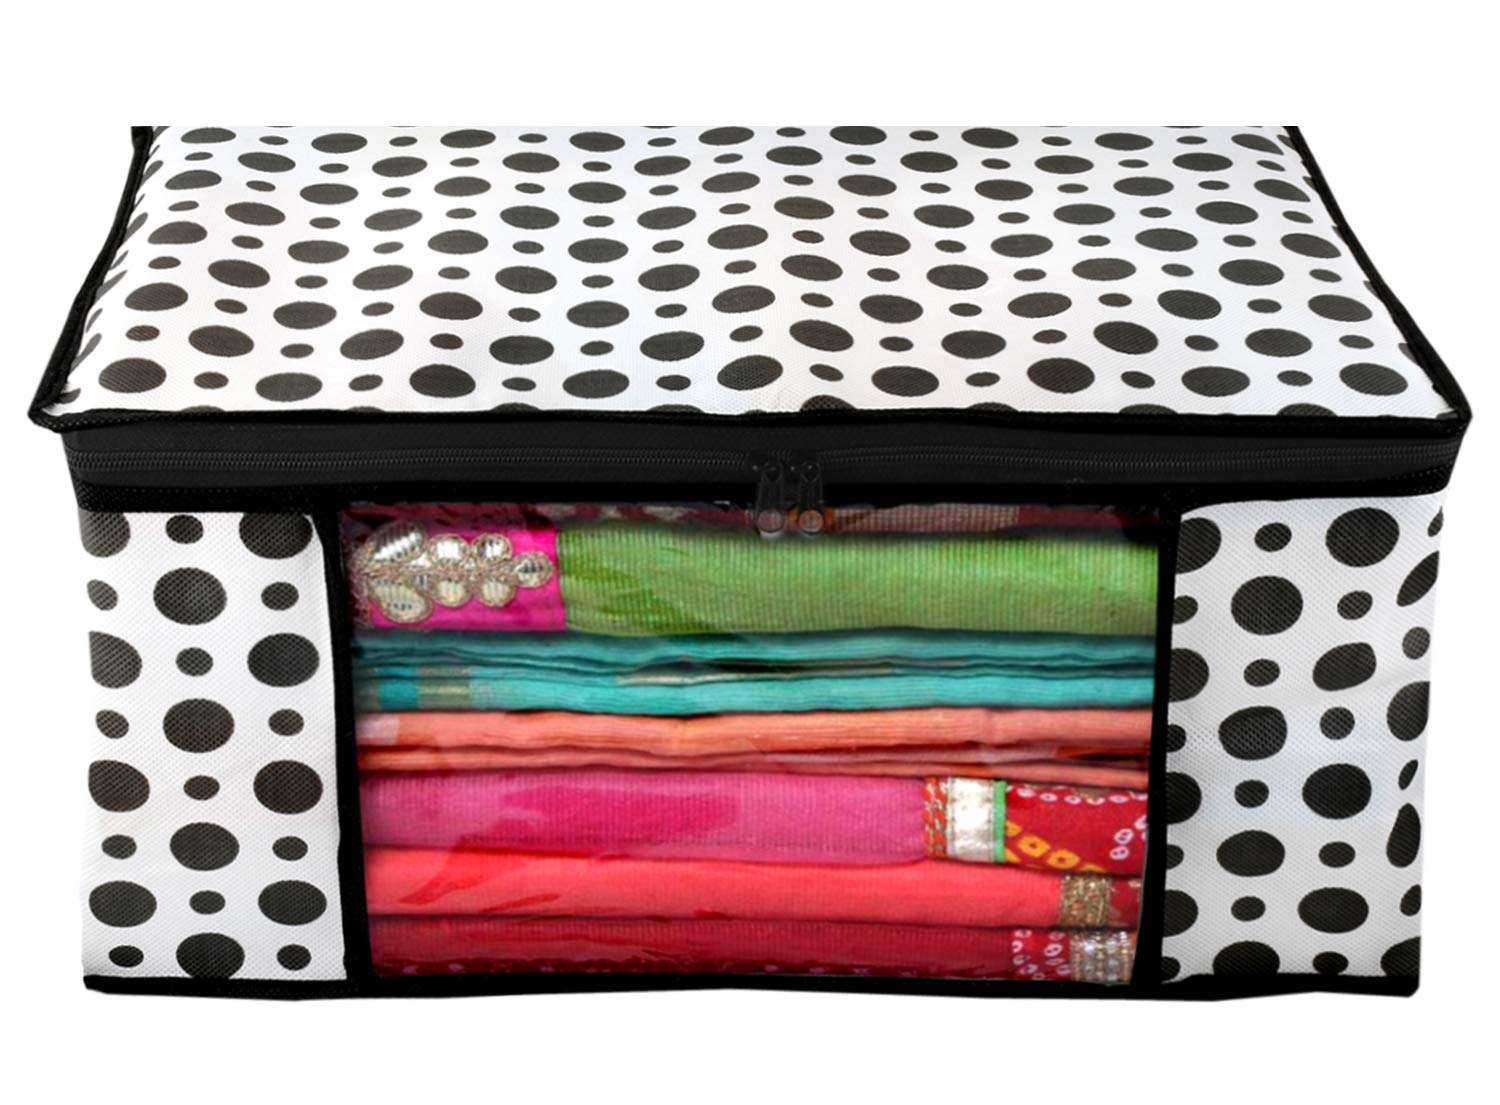 Kuber Industries Polka Dots Design 6 Piece Non Woven Fabric Saree Cover/ Clothes Organiser For Wardrobe Set with Transparent Window, Extra Large,(Black & White) -CTKTC038089 Pack of 6